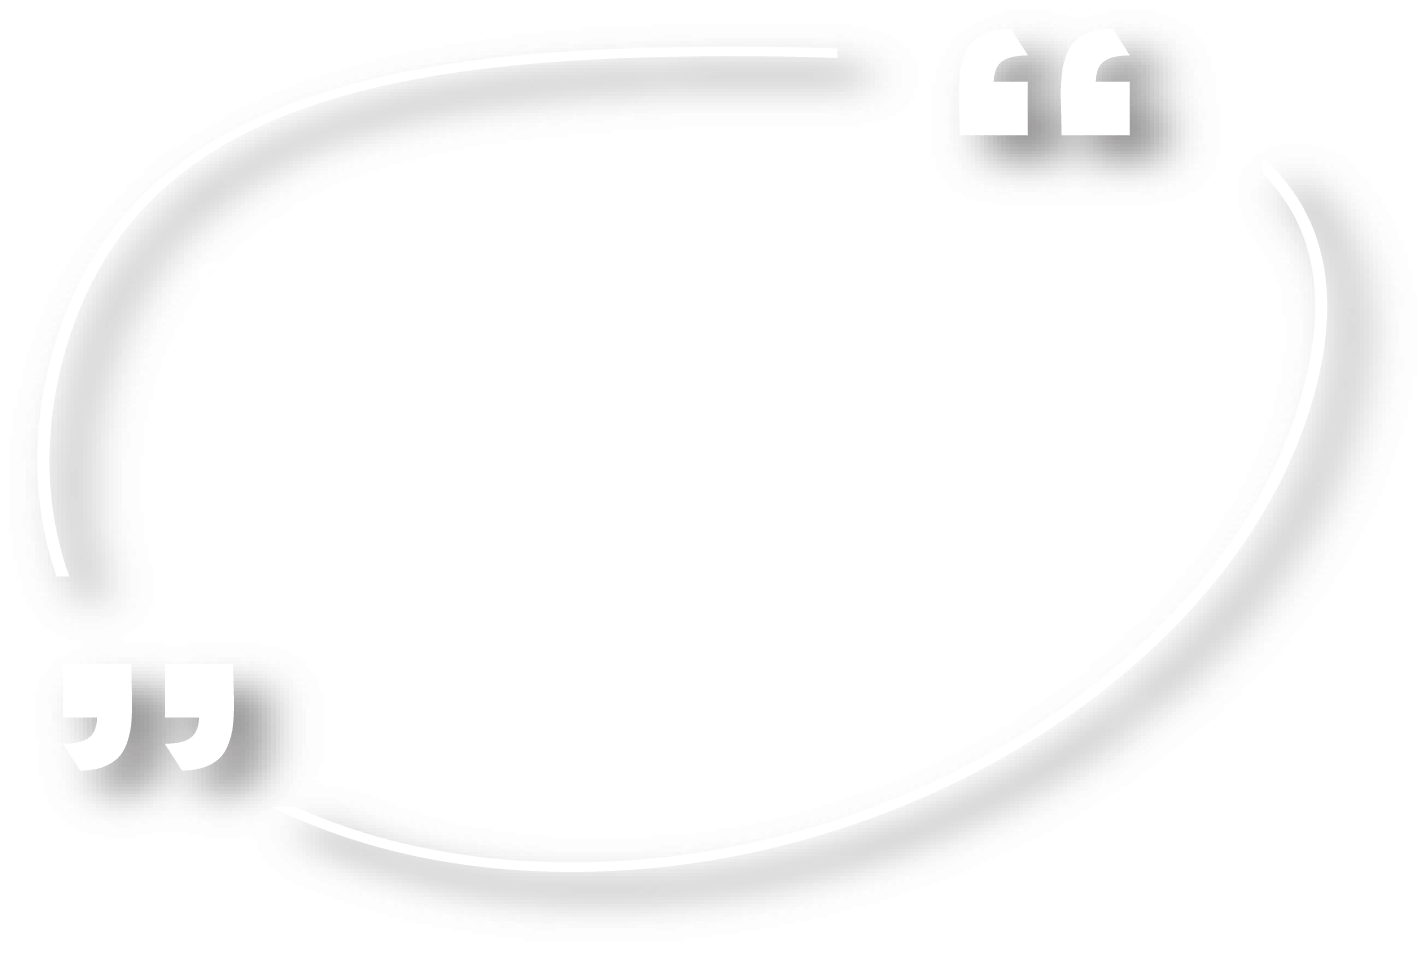 Quote from Derric Chew